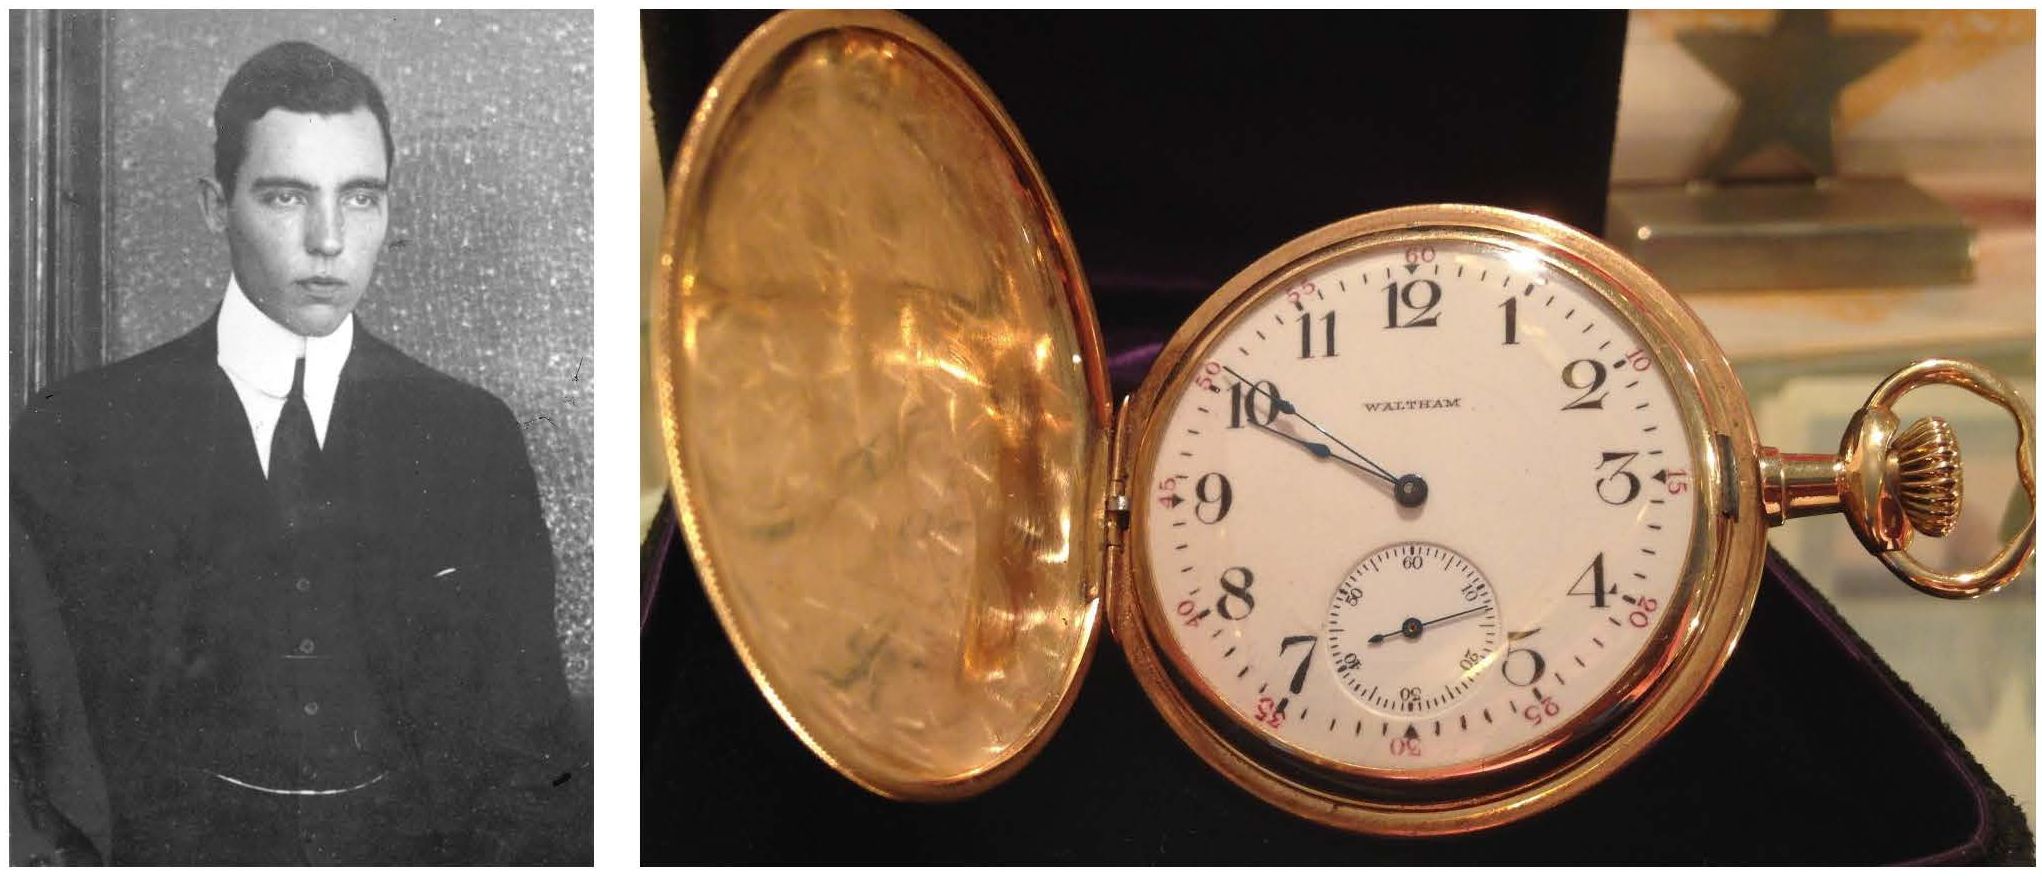 The previous owner of the brownstone was Vincent Astor, who often sported the gold watch of his father on a chain. The Waltham watch was recovered from the body of John Jacob Astor IV from the Titanic.